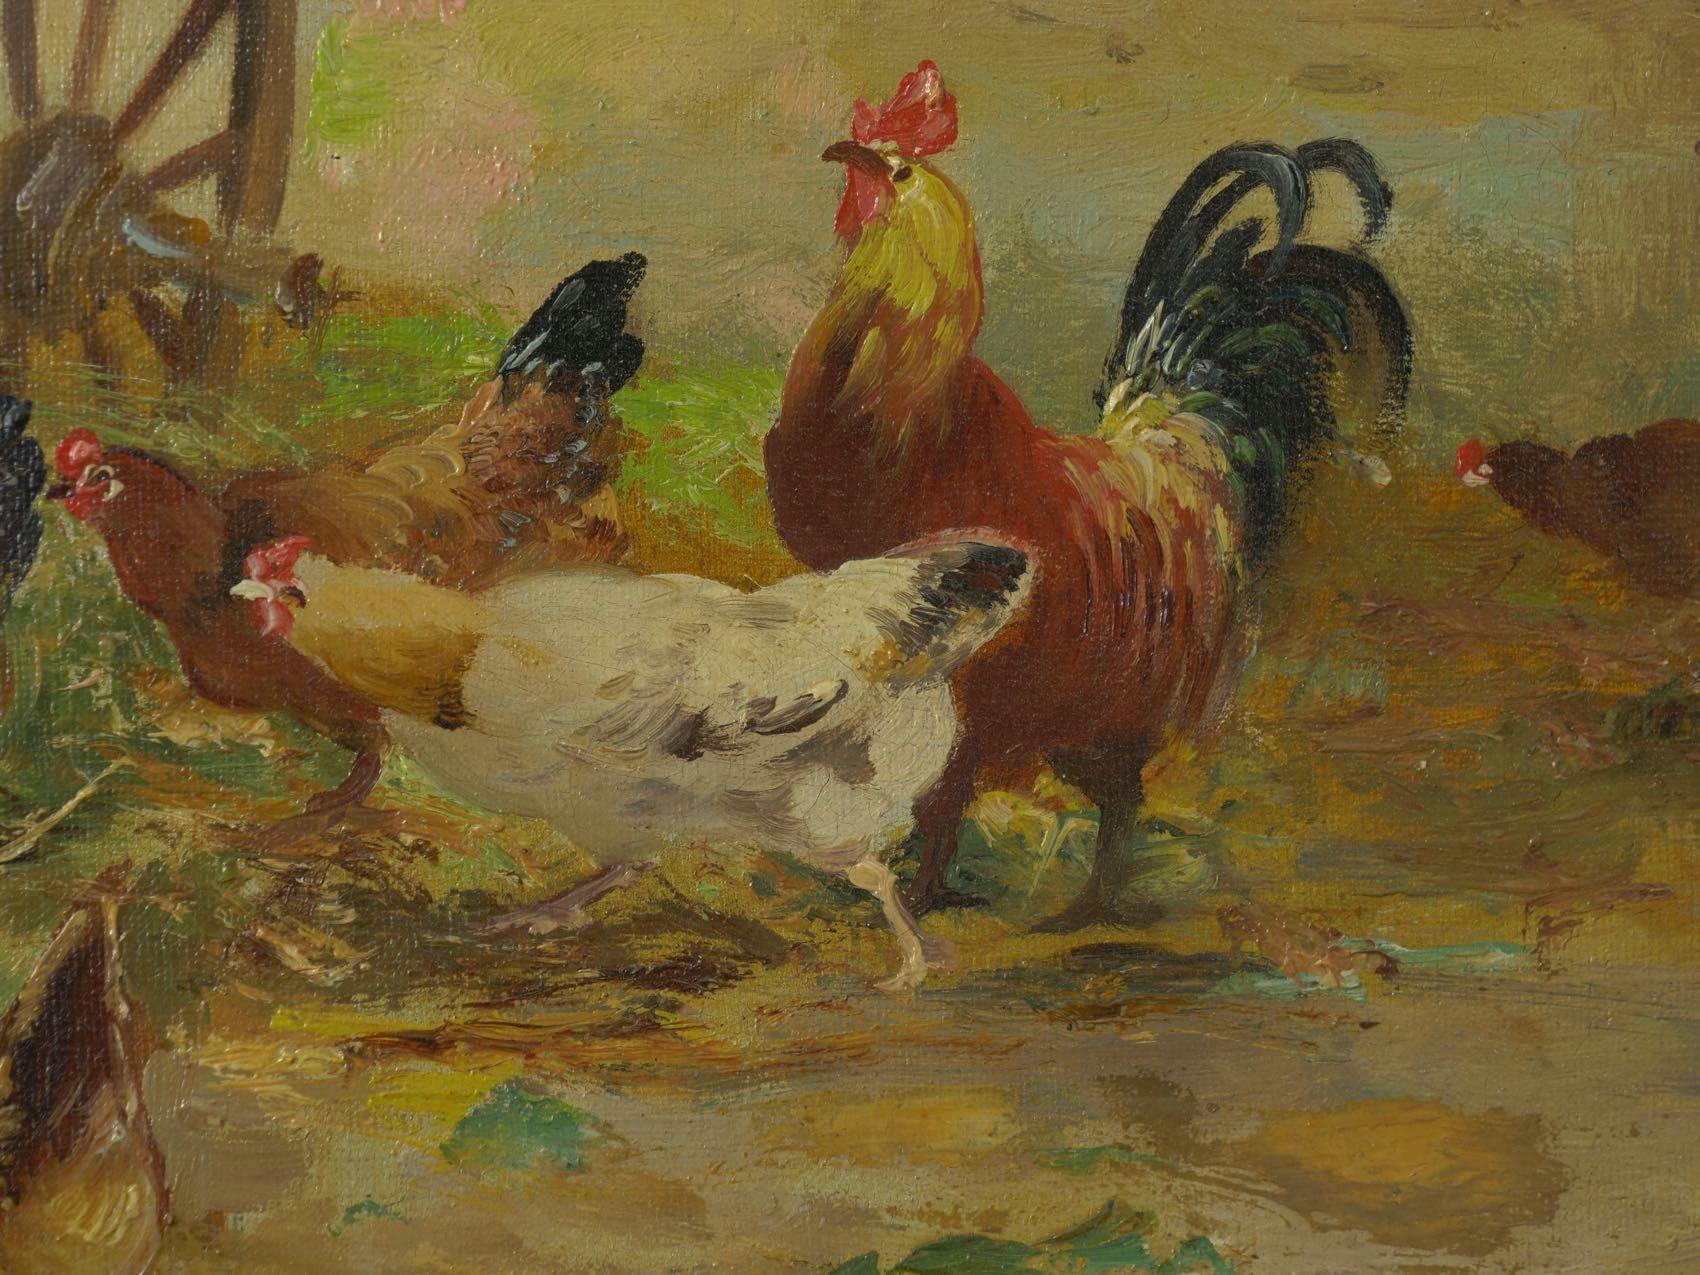 Barnyard Chickens Painting by Jacques van Coppenolle 1